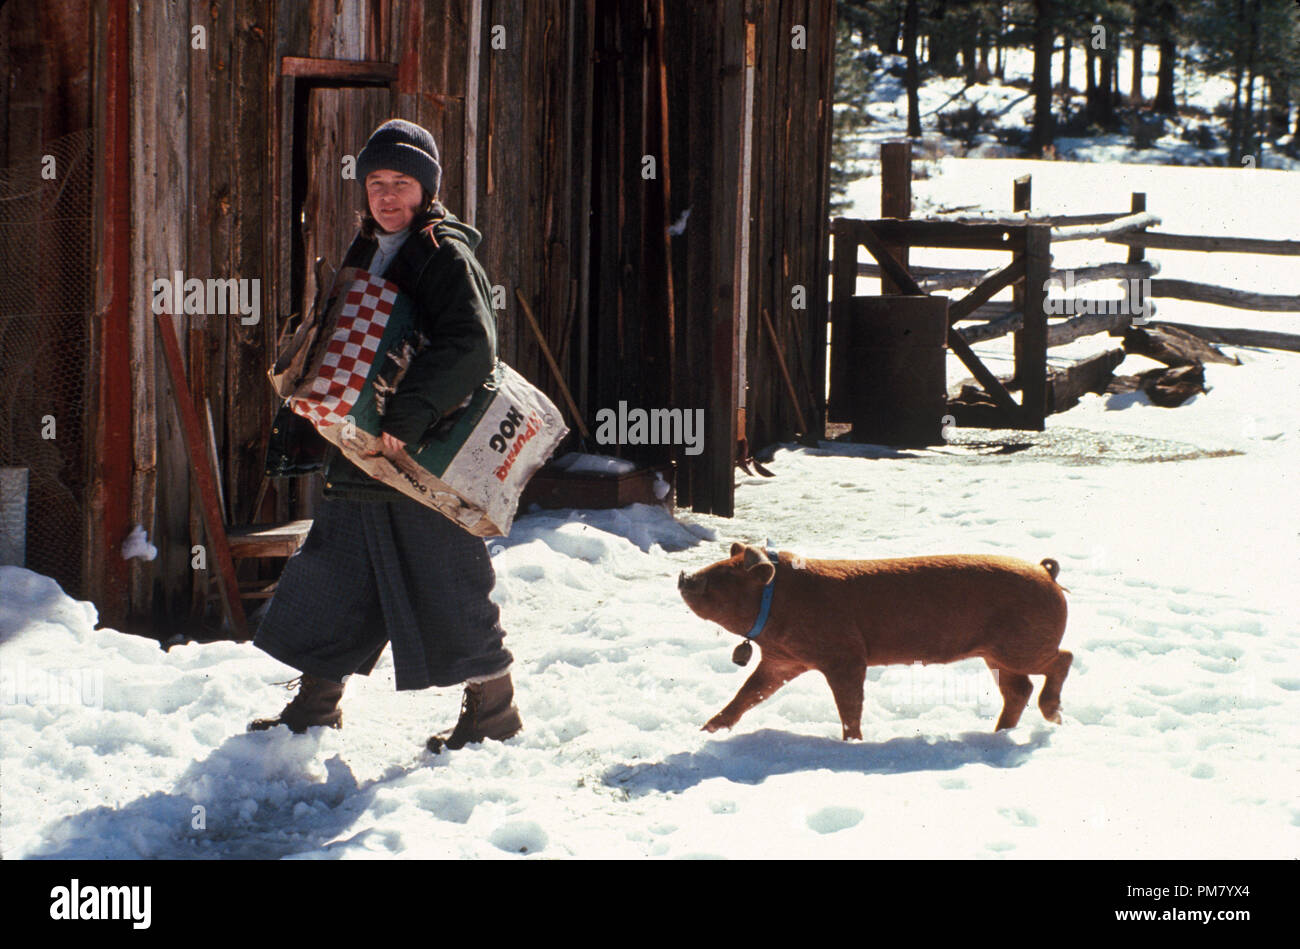 Film still or Publicity still from 'Misery' Kathy Bates © 1990 Castle Rock Photo Credit: Merrick Morton All Rights Reserved   File Reference # 31571158THA  For Editorial Use Only Stock Photo